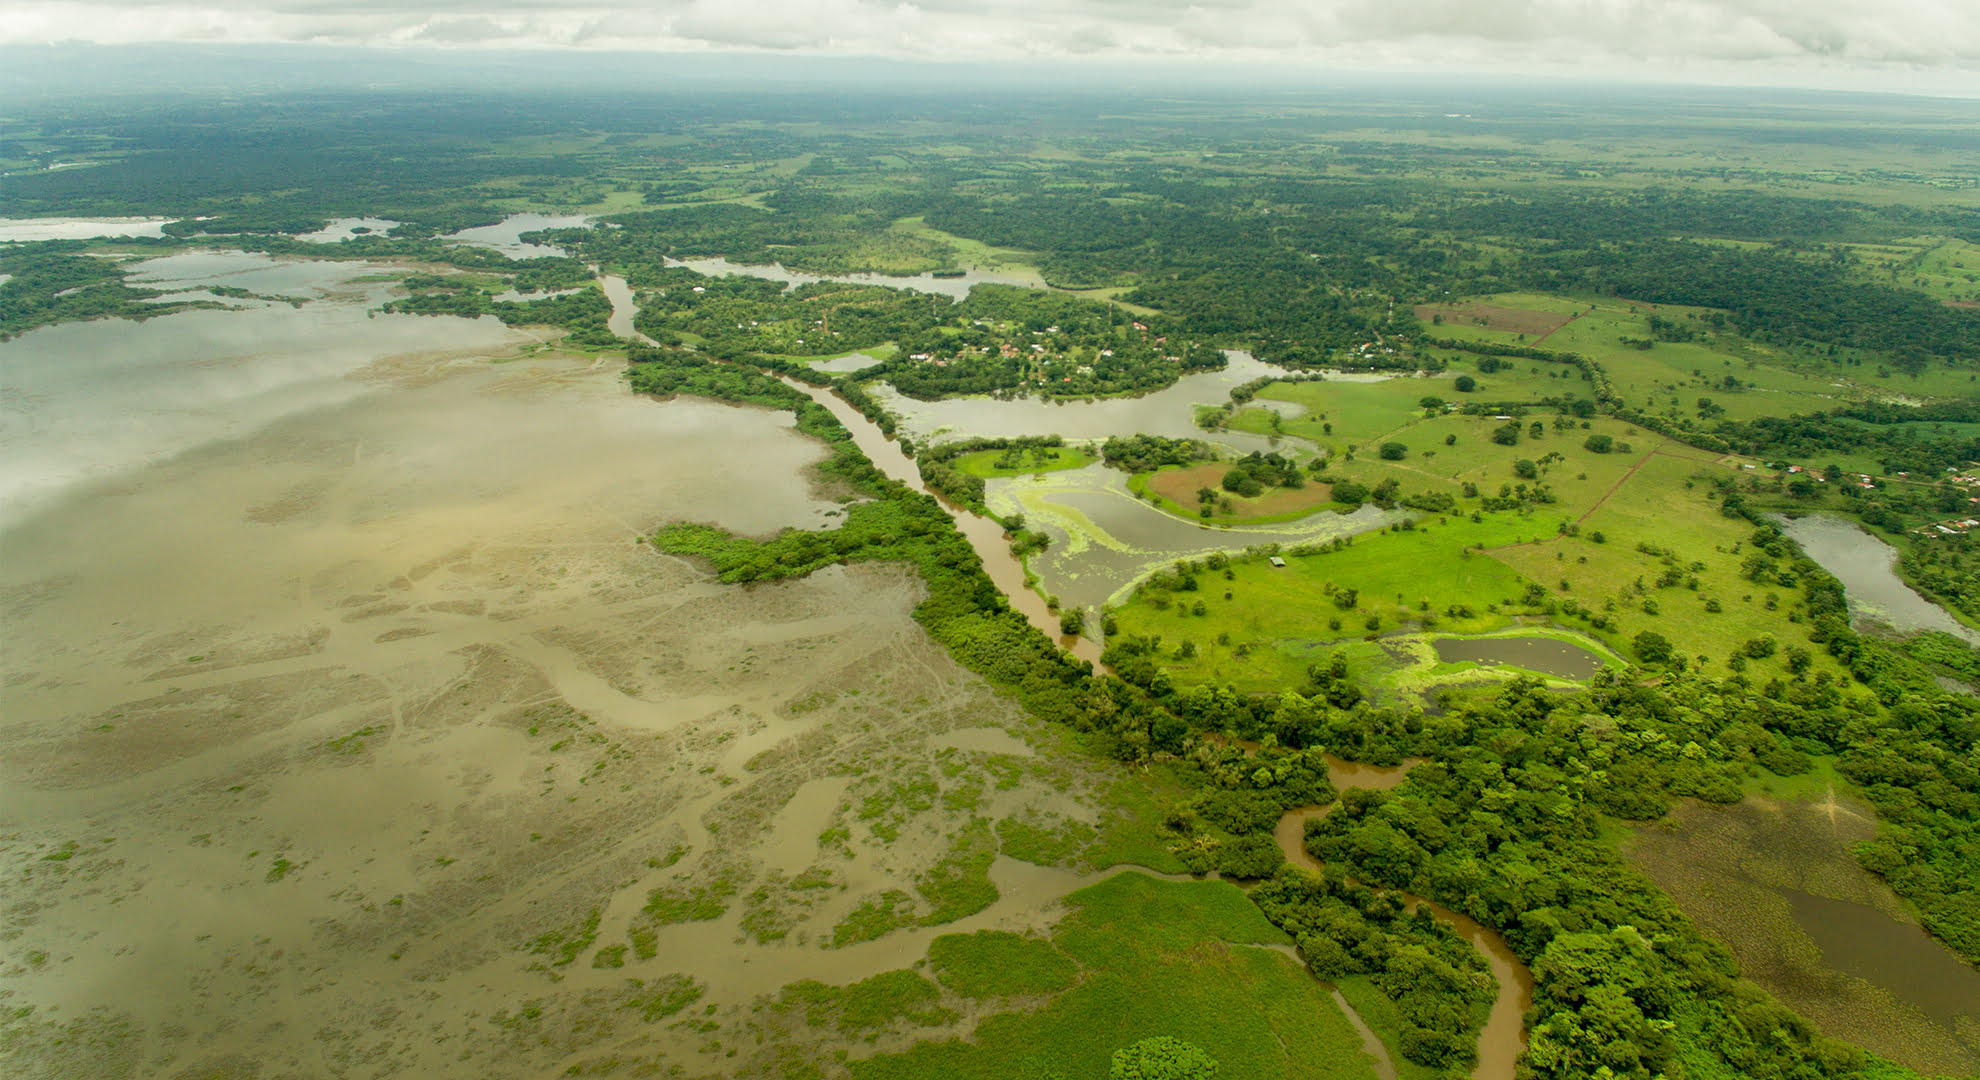 What can I do in the National Refuge of Caño Negro?